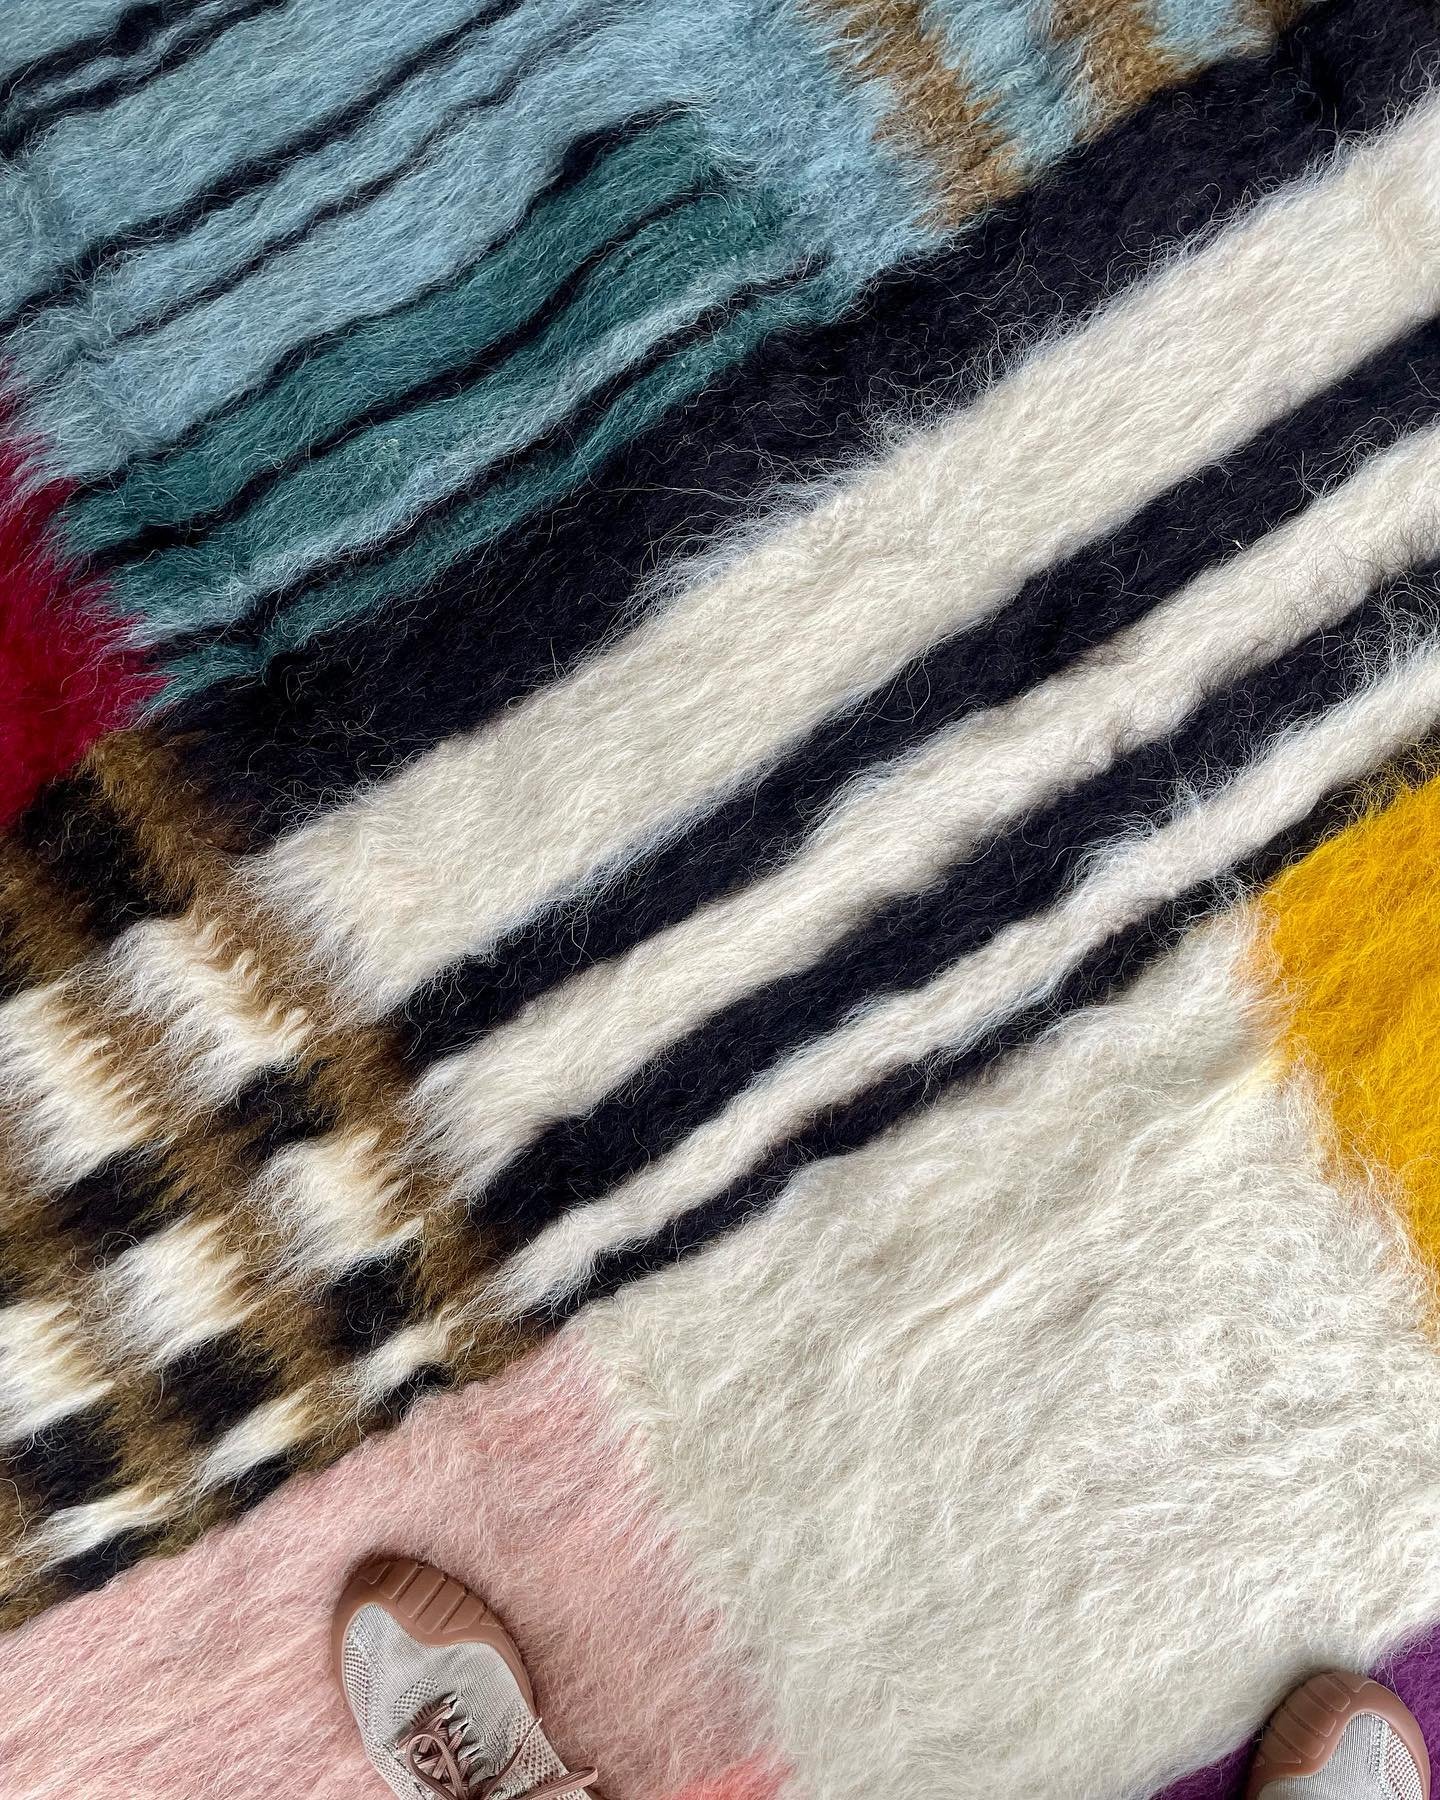 The latest rugs from Olga, our wonderful maker in Ukraine, have arrived. She has managed under extreme circumstances to create these incredible rugs. Here&rsquo;s a sneak peek at the new Bauhaus design.